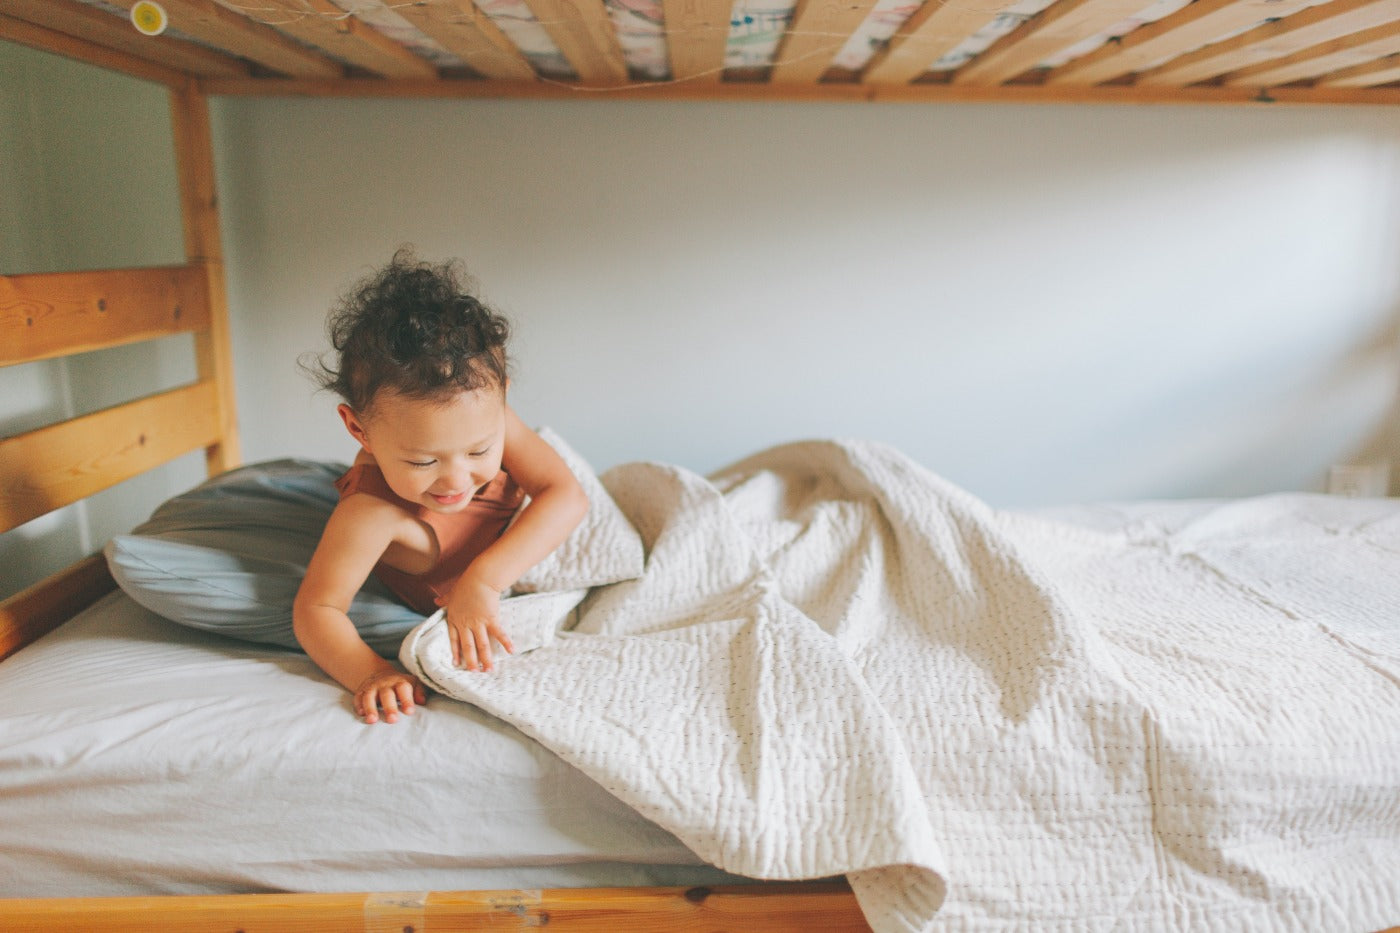 30 Learning Activities for 2 Year Olds - Sleeping Should Be Easy